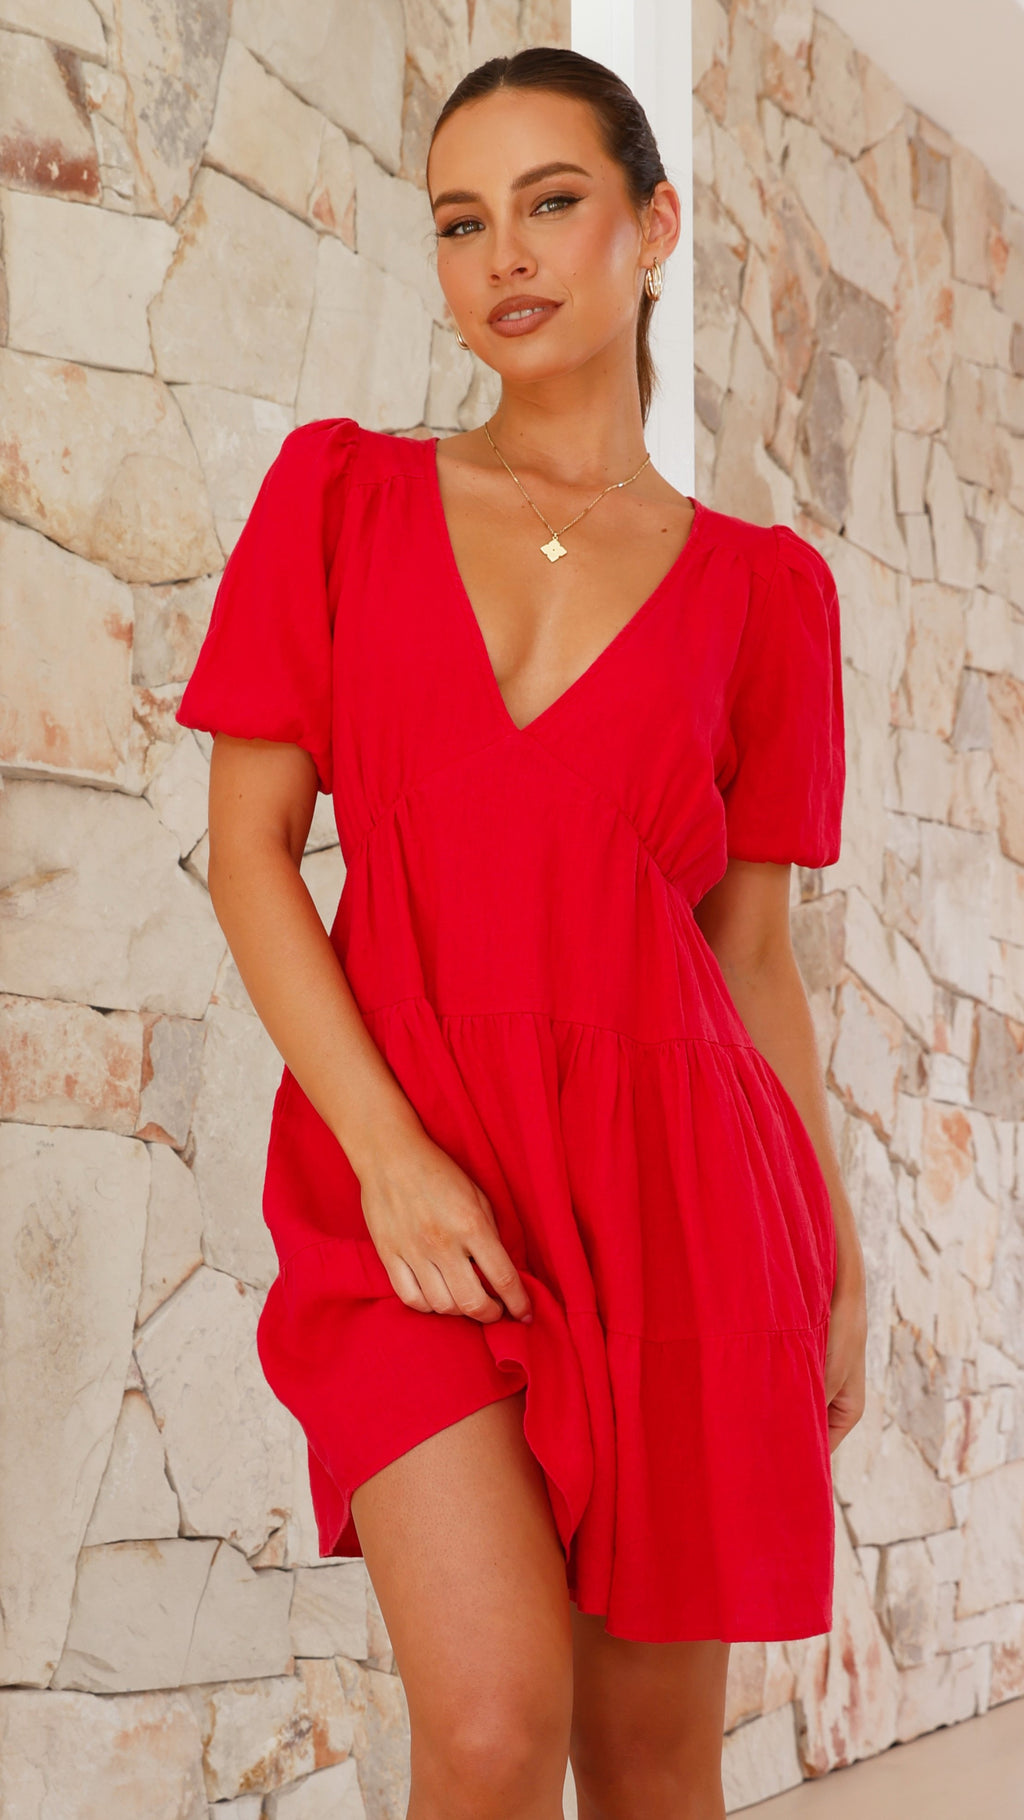 Milly Mini Dress - Red